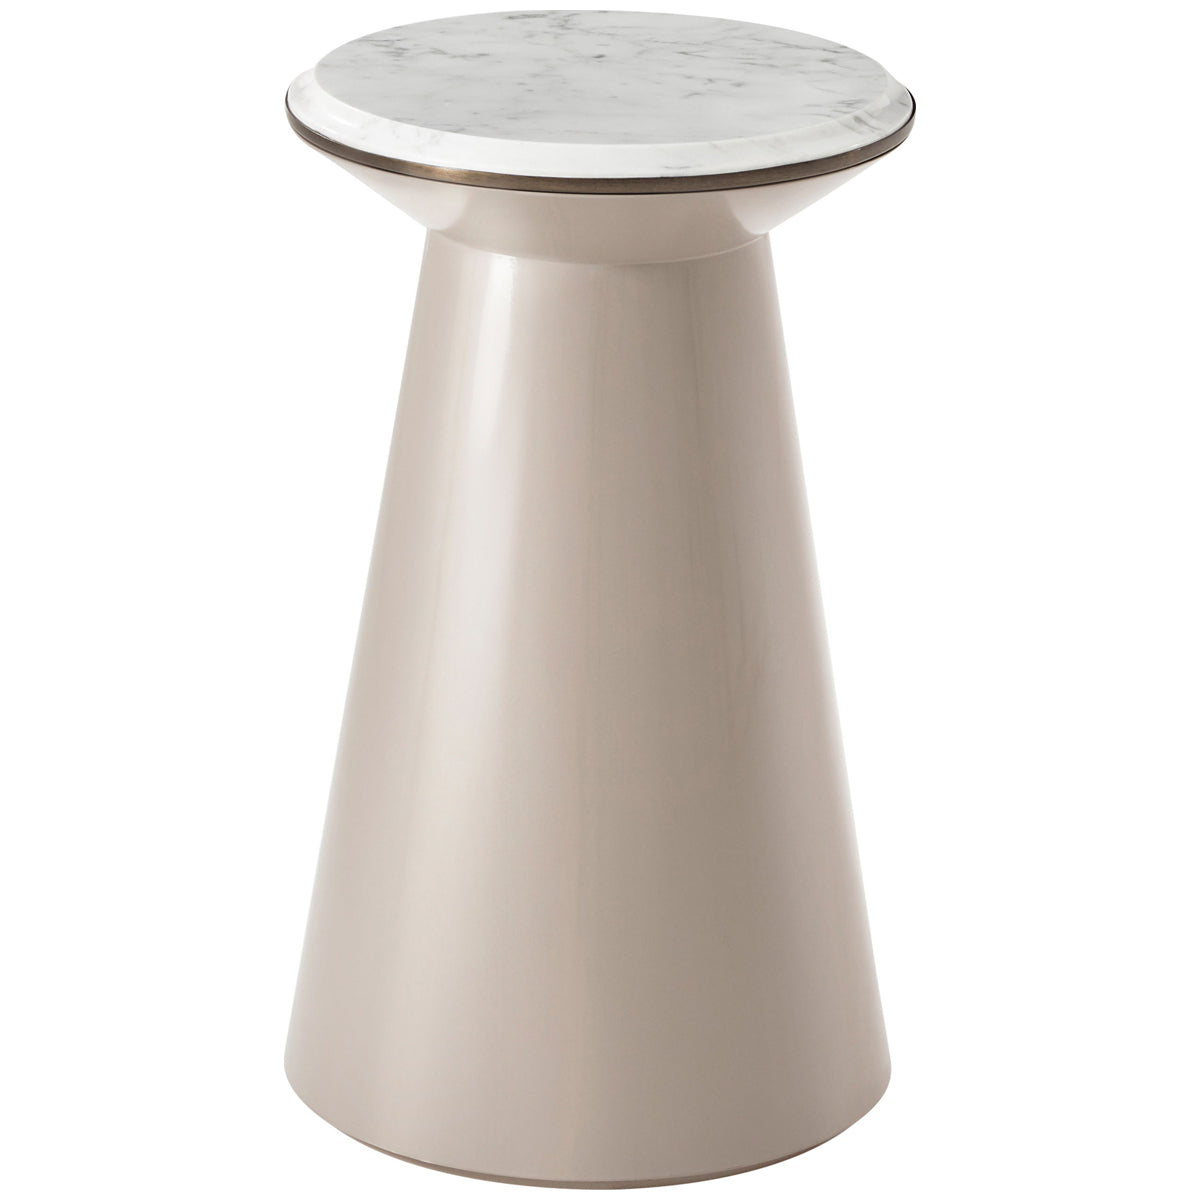 Theodore Alexander Contour Small Side Table in Pure Pearl